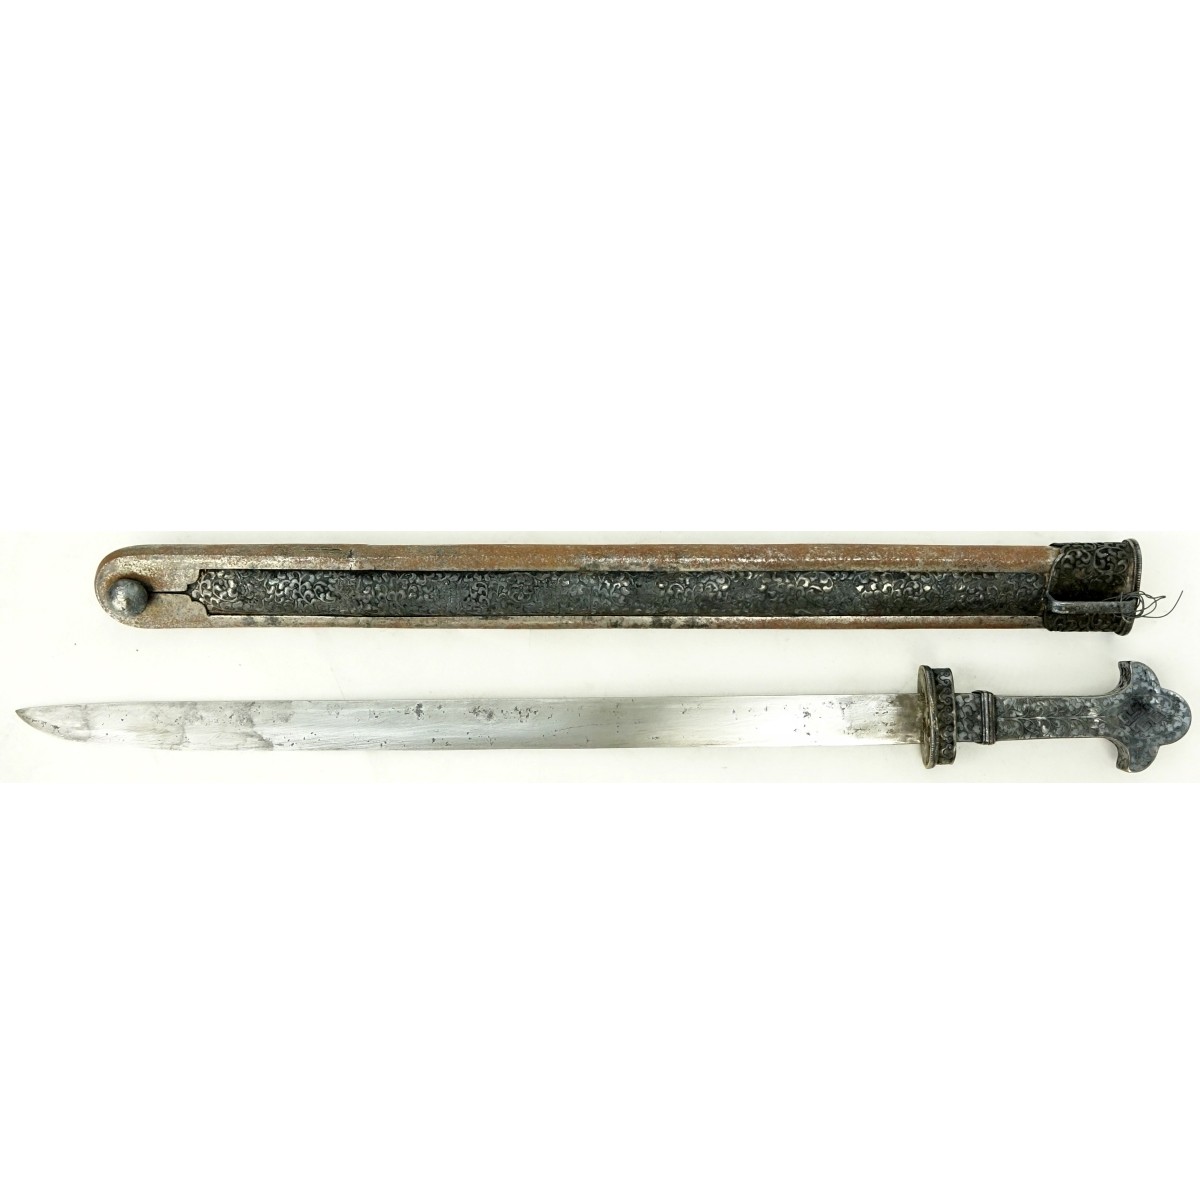 Antique Tibetan Silver and Gemstone Mounted Sword